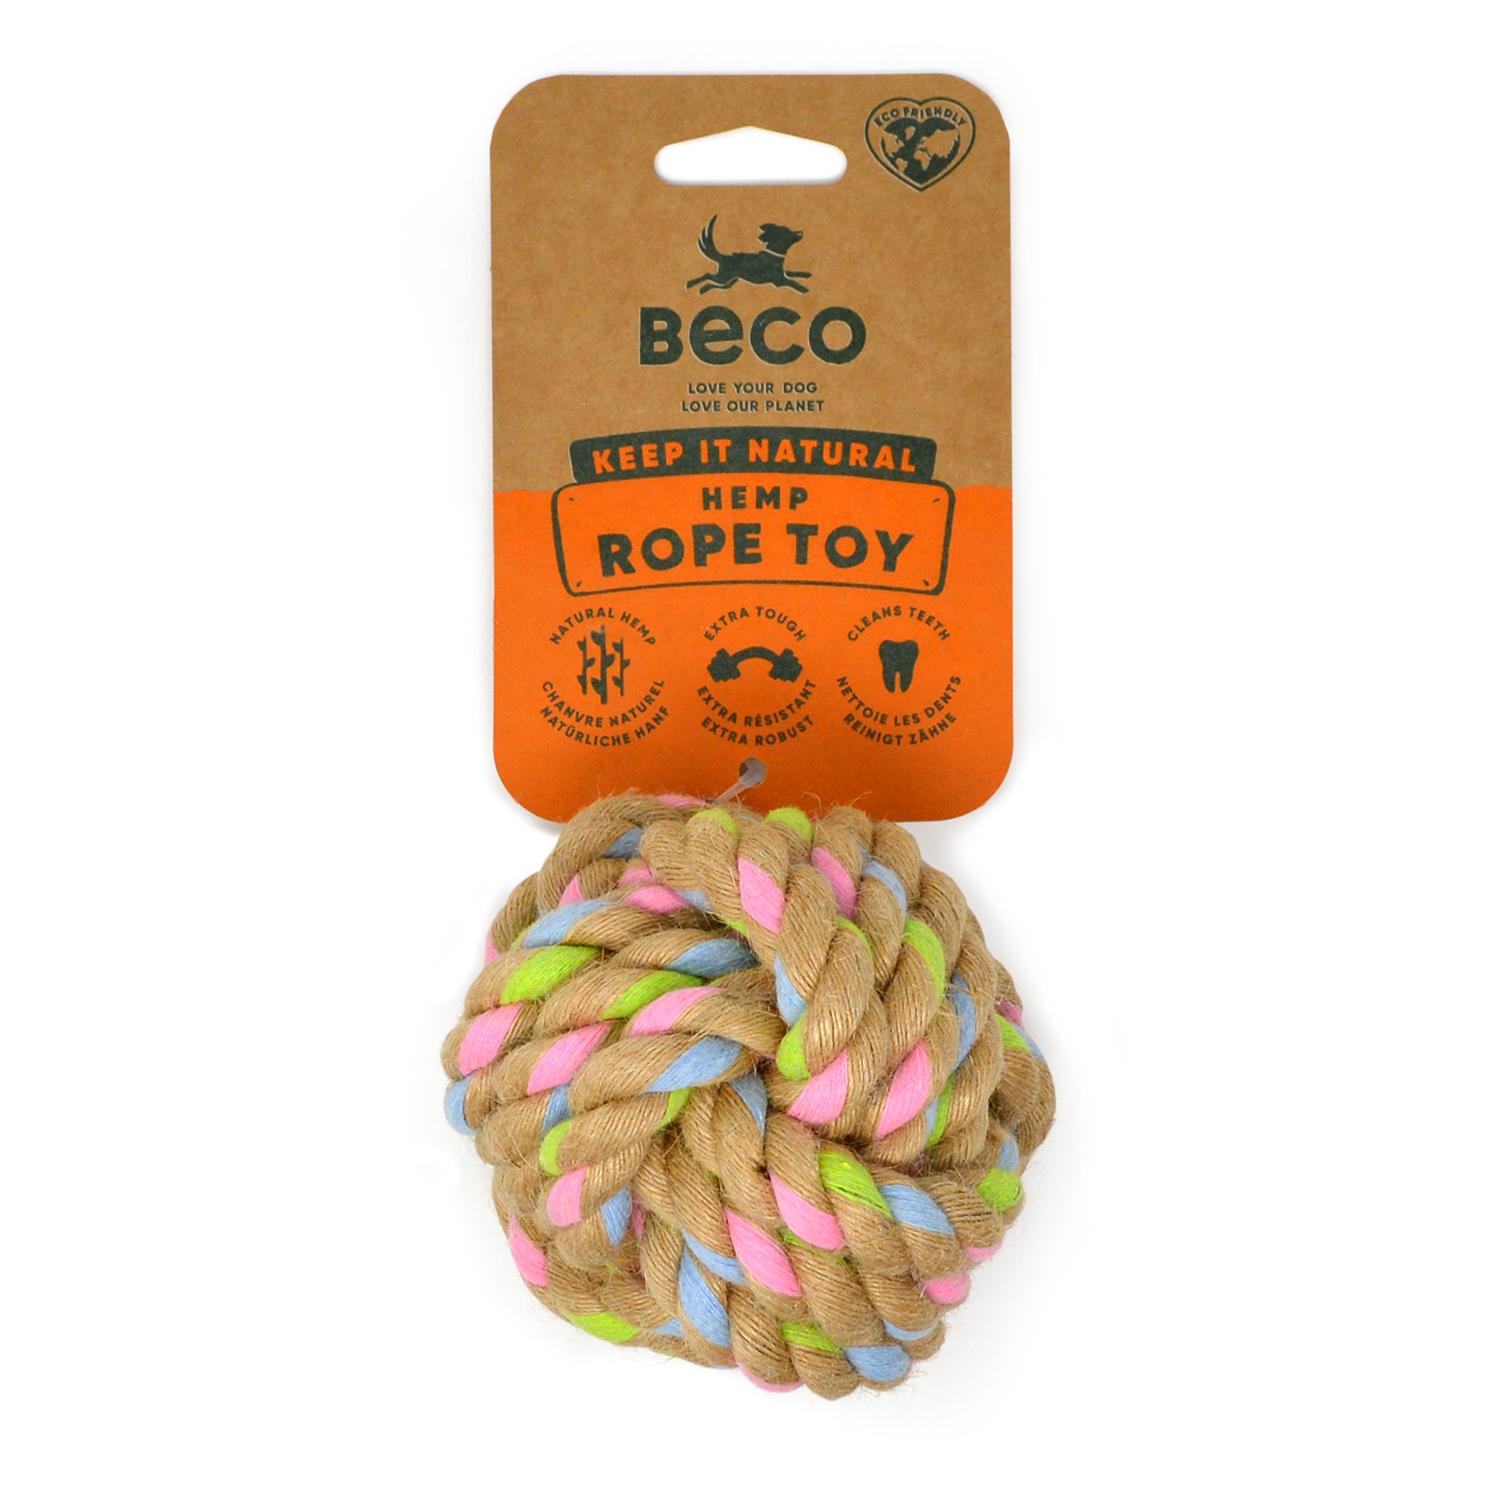 A Large Beco Natural Hemp Knot Rope Ball Dog Toy